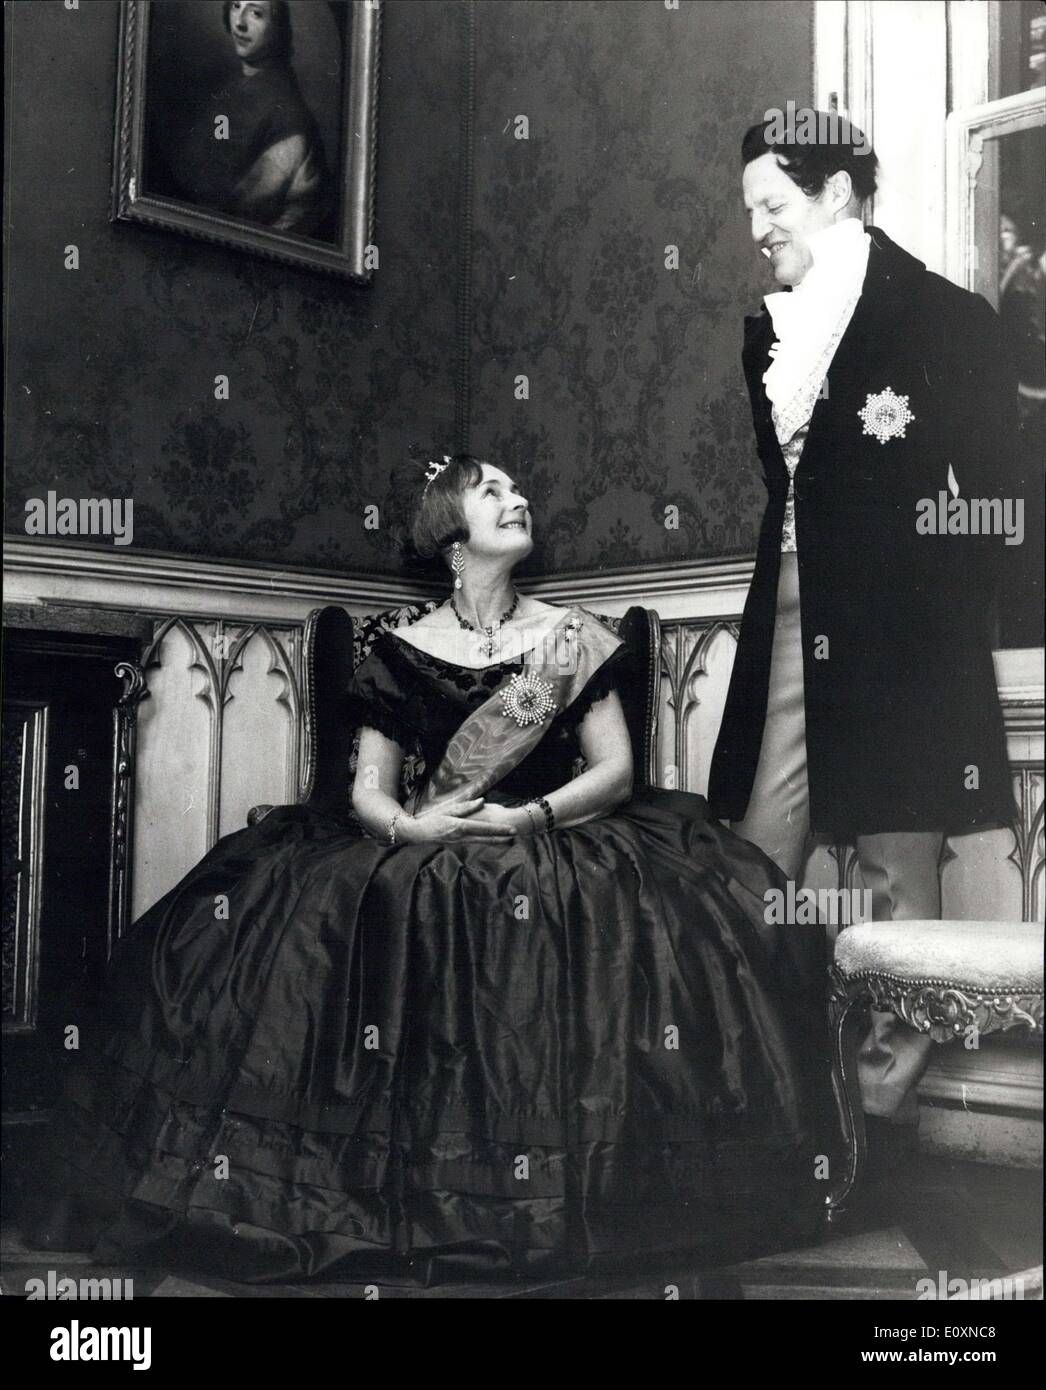 Apr. 17, 1967 - 17.4.67 Lord and Lady Longford at fancy dress party. The centre of attention at the party this weekend were, of course, Queen Victoria and Prince Albert. That they turned out to be heavily-disguised Lord and Lady Longford disappointed no one. The fancy dress business was for the 21st birthday party of their daughter, Catherine, held at Strawberry Hill, the mock Gothic mansion at Twickenham in Middlesex Stock Photo